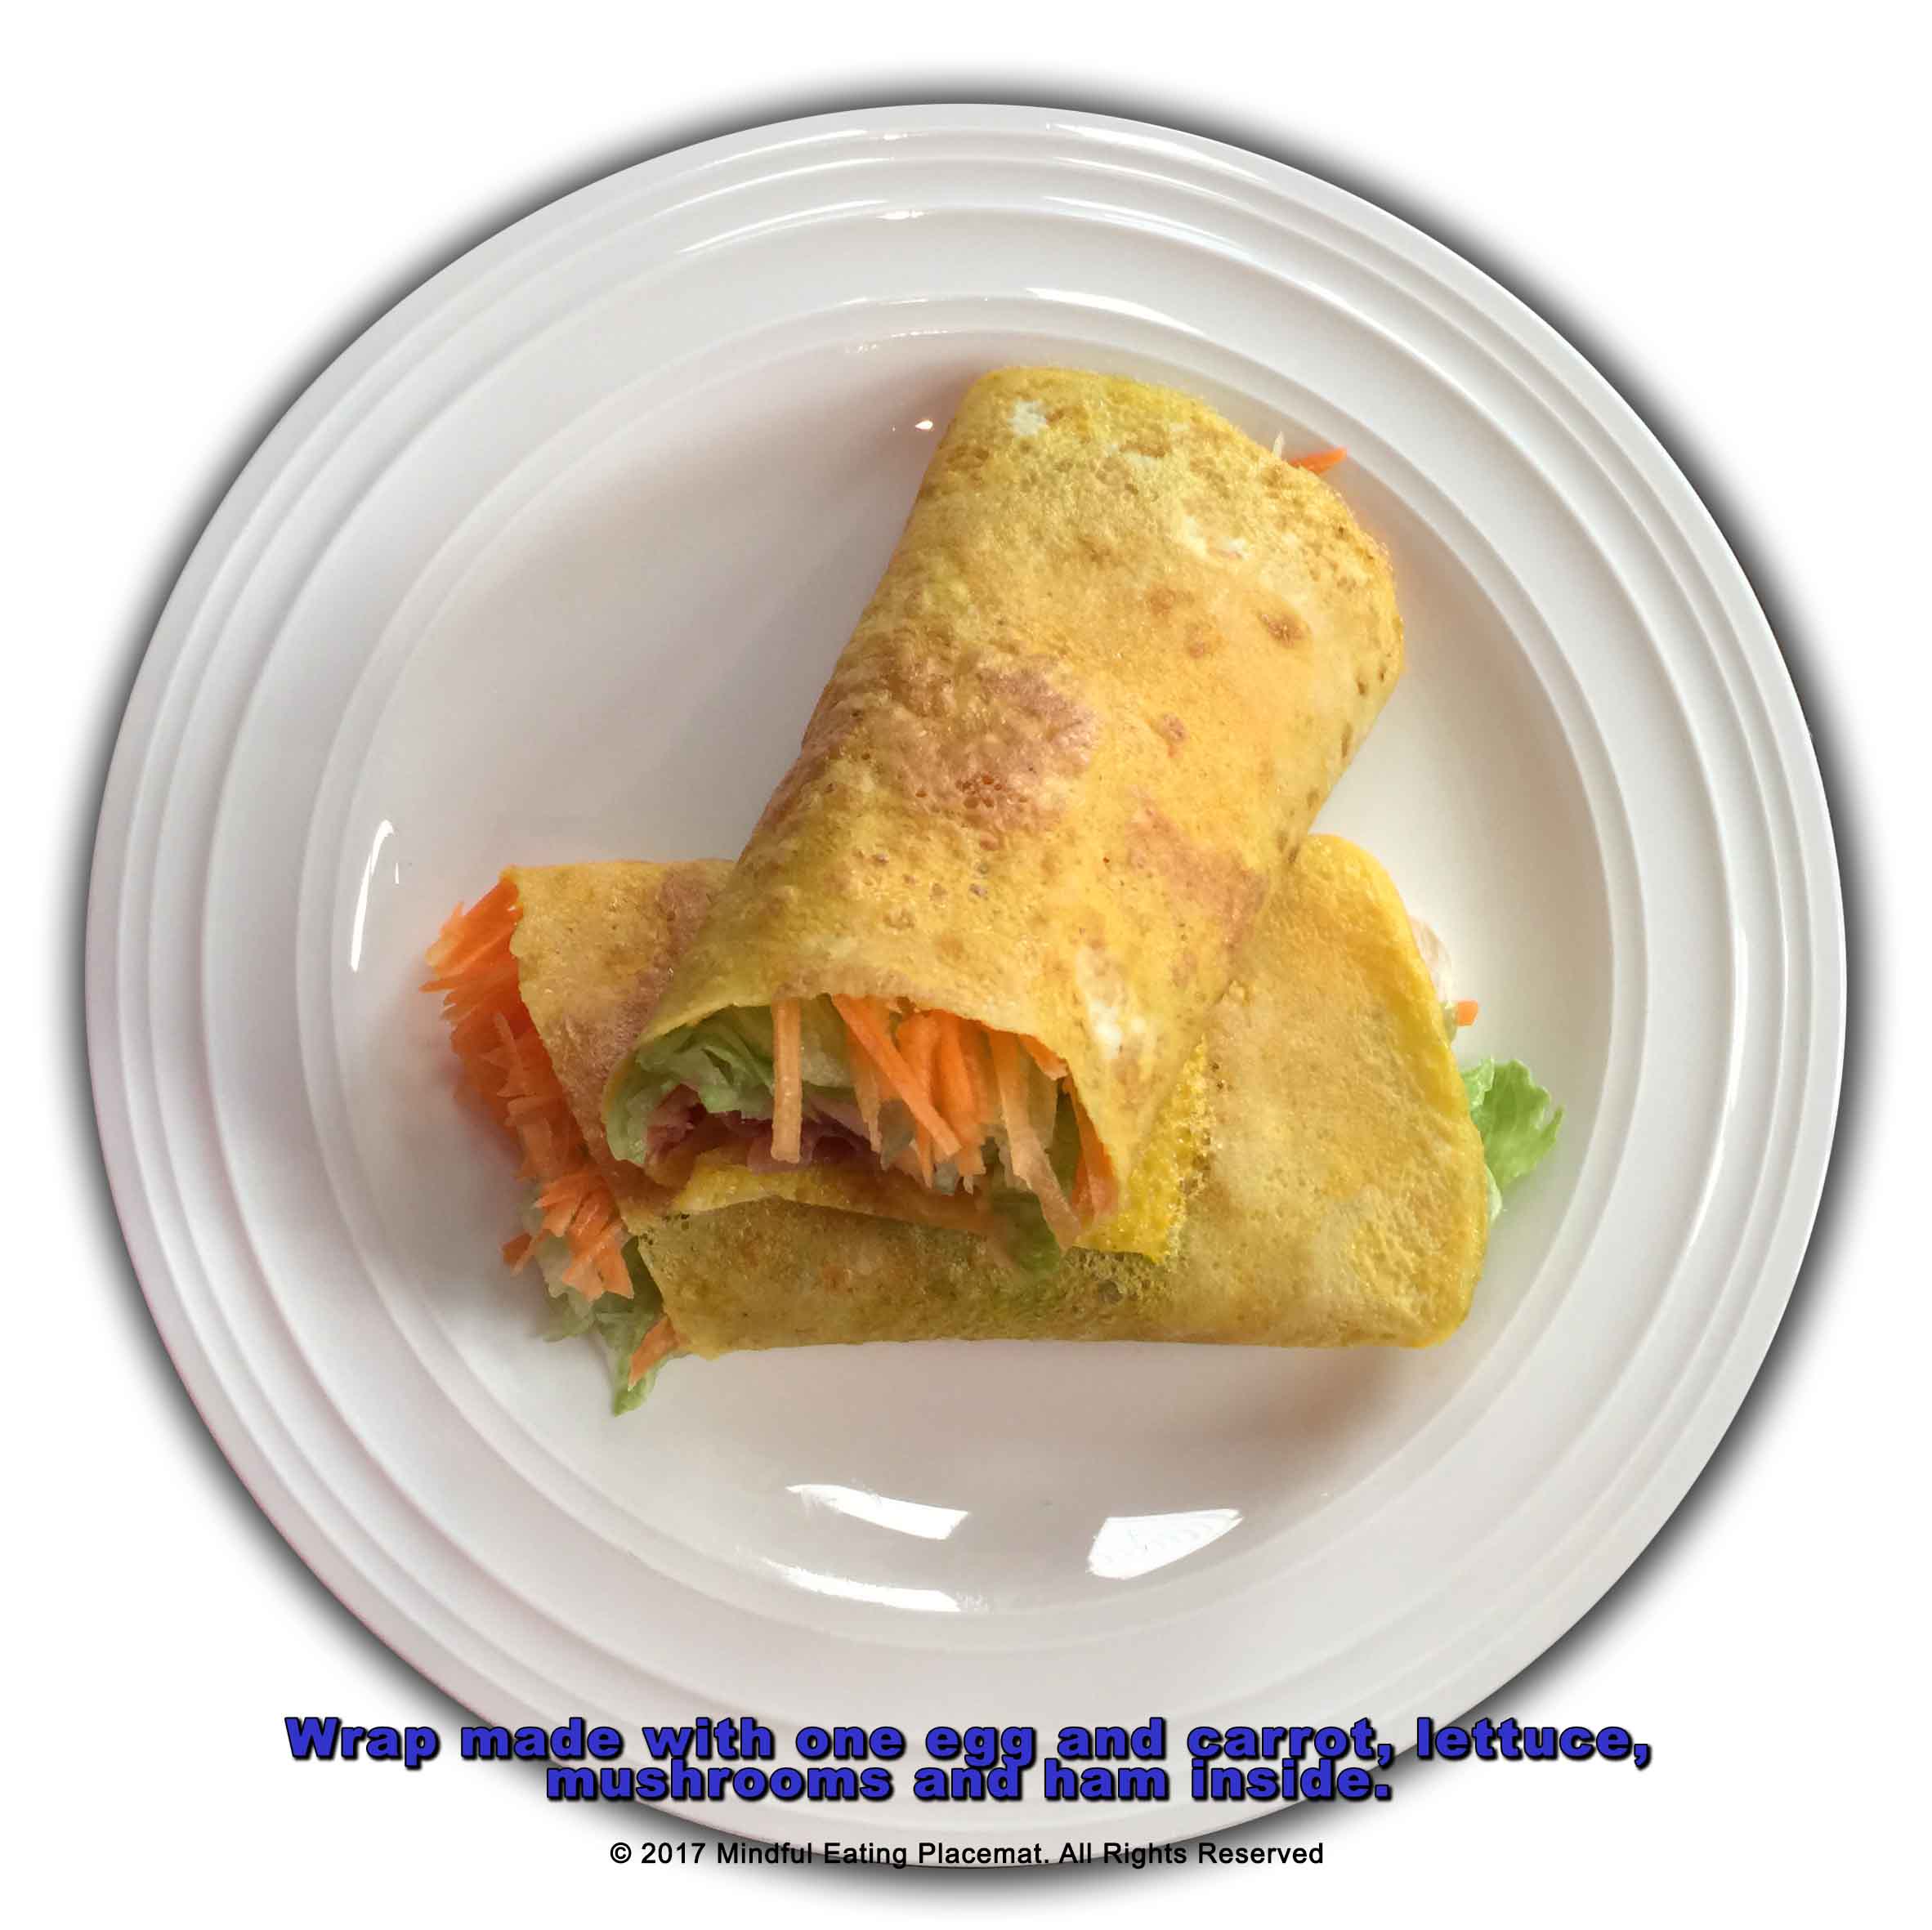 Egg wrap with carrot, ham, lettuce and mushrooms